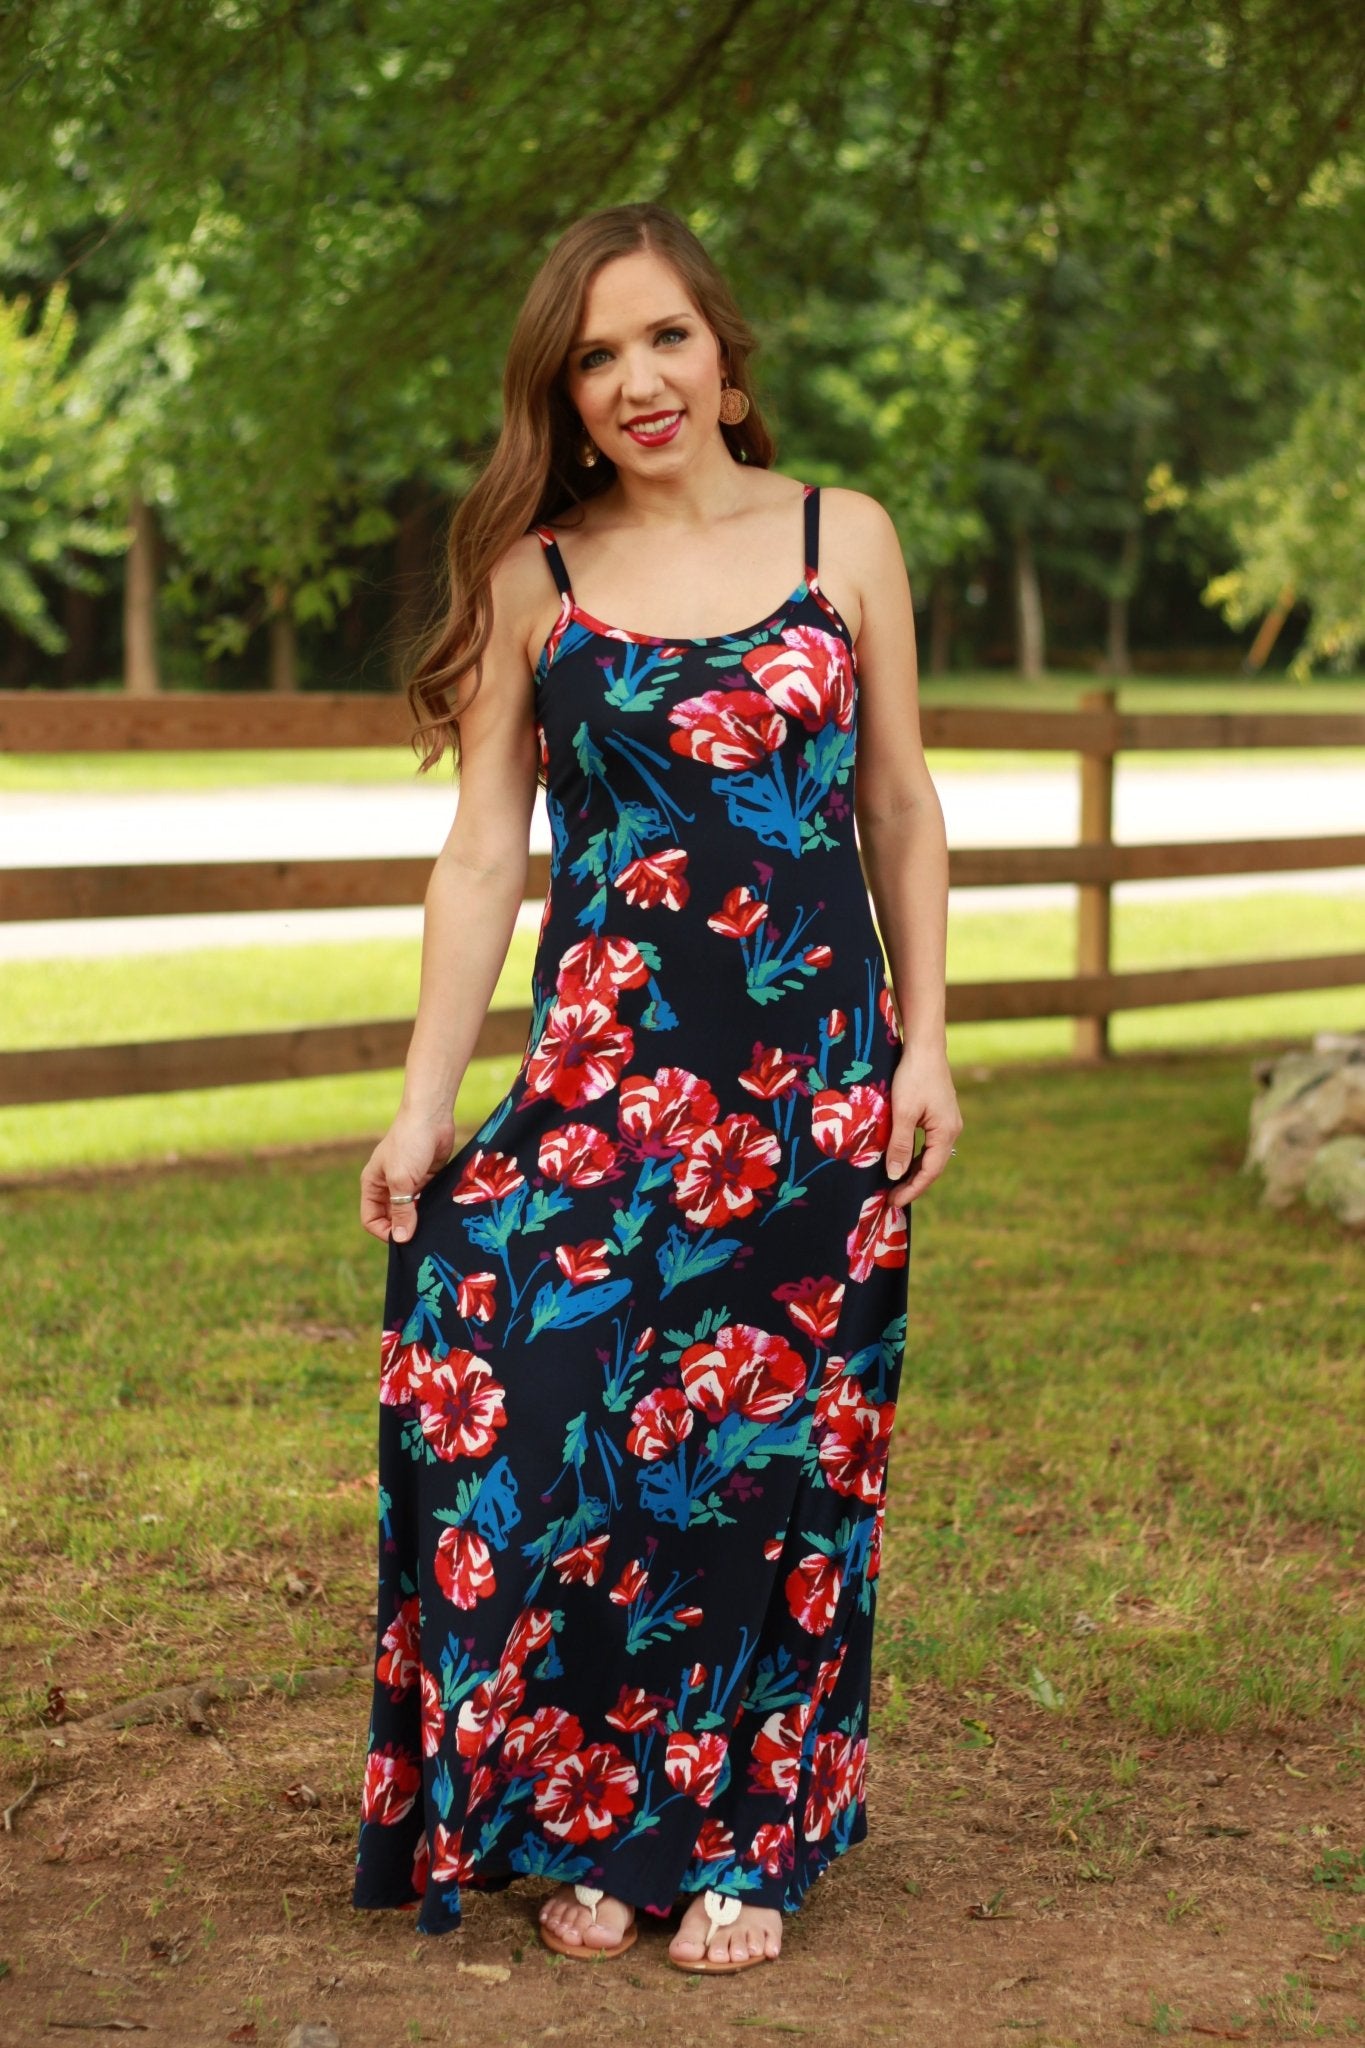 Last Cuts! DBP: Twilight Watercolor Flowers on Navy. Double Brushed Poly Knit Fabric. BP-115-NVY - Boho Fabrics